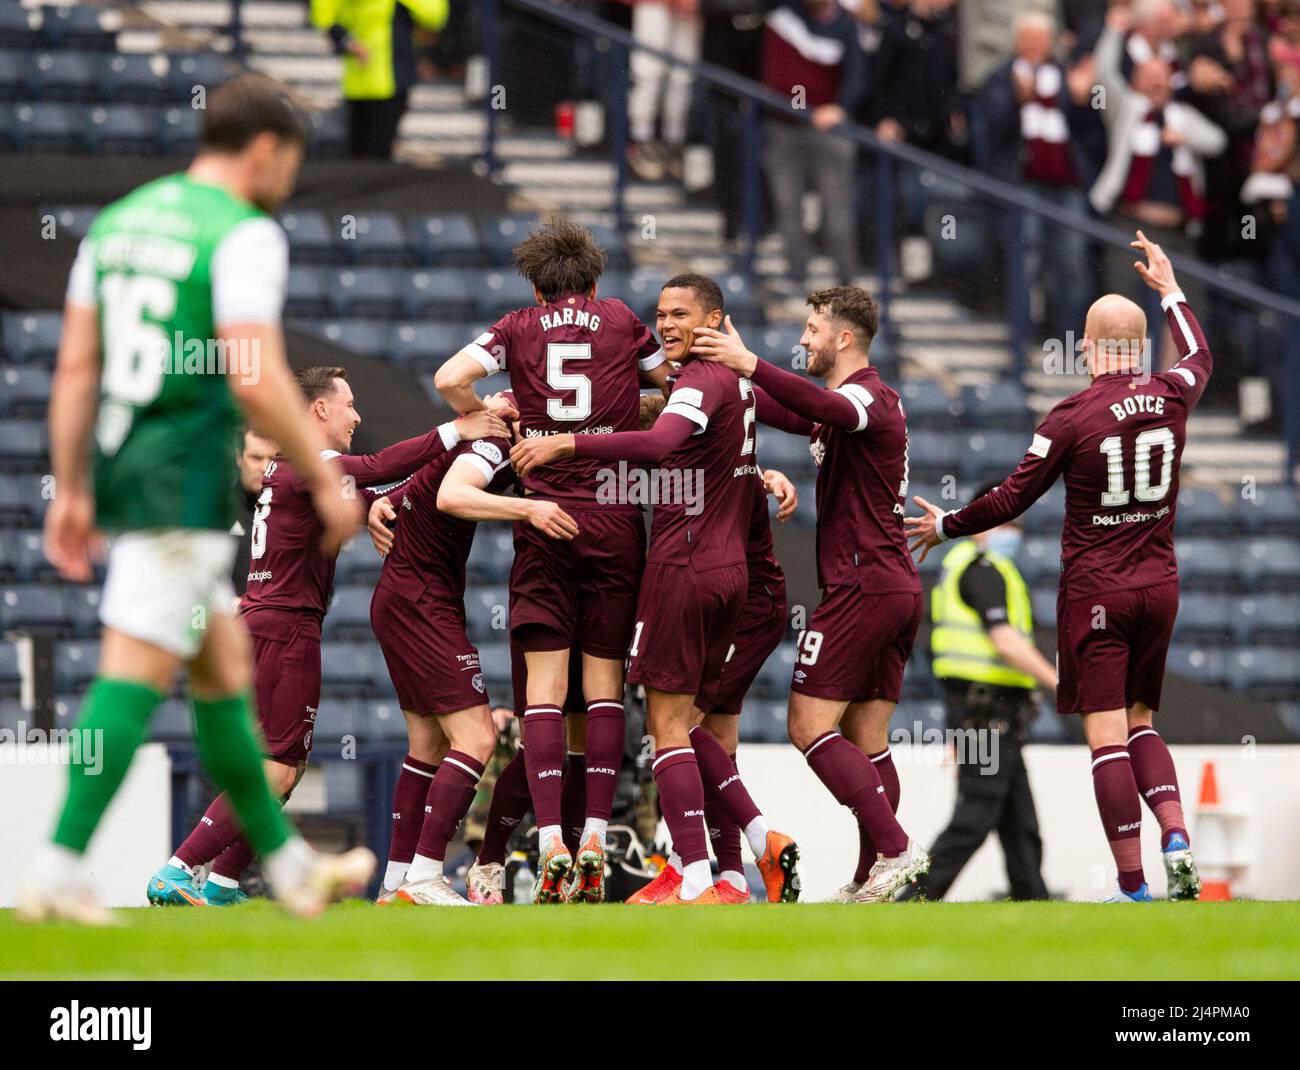 Glasgow, UK. 07th Apr, 2022. Scottish Cup semi final - Heart of Midlothian FC v Hibernian FC 07/04/2022 Pic shows: Hearts' left-back, Stephen Kingsley, is mobbed by teammates after putting his side 2-0 ahead in the 21st minute as Hearts take on Hibs in the Scottish Cup semi final at Hampden Park, Glasgow Credit: Ian Jacobs/Alamy Live News Stock Photo